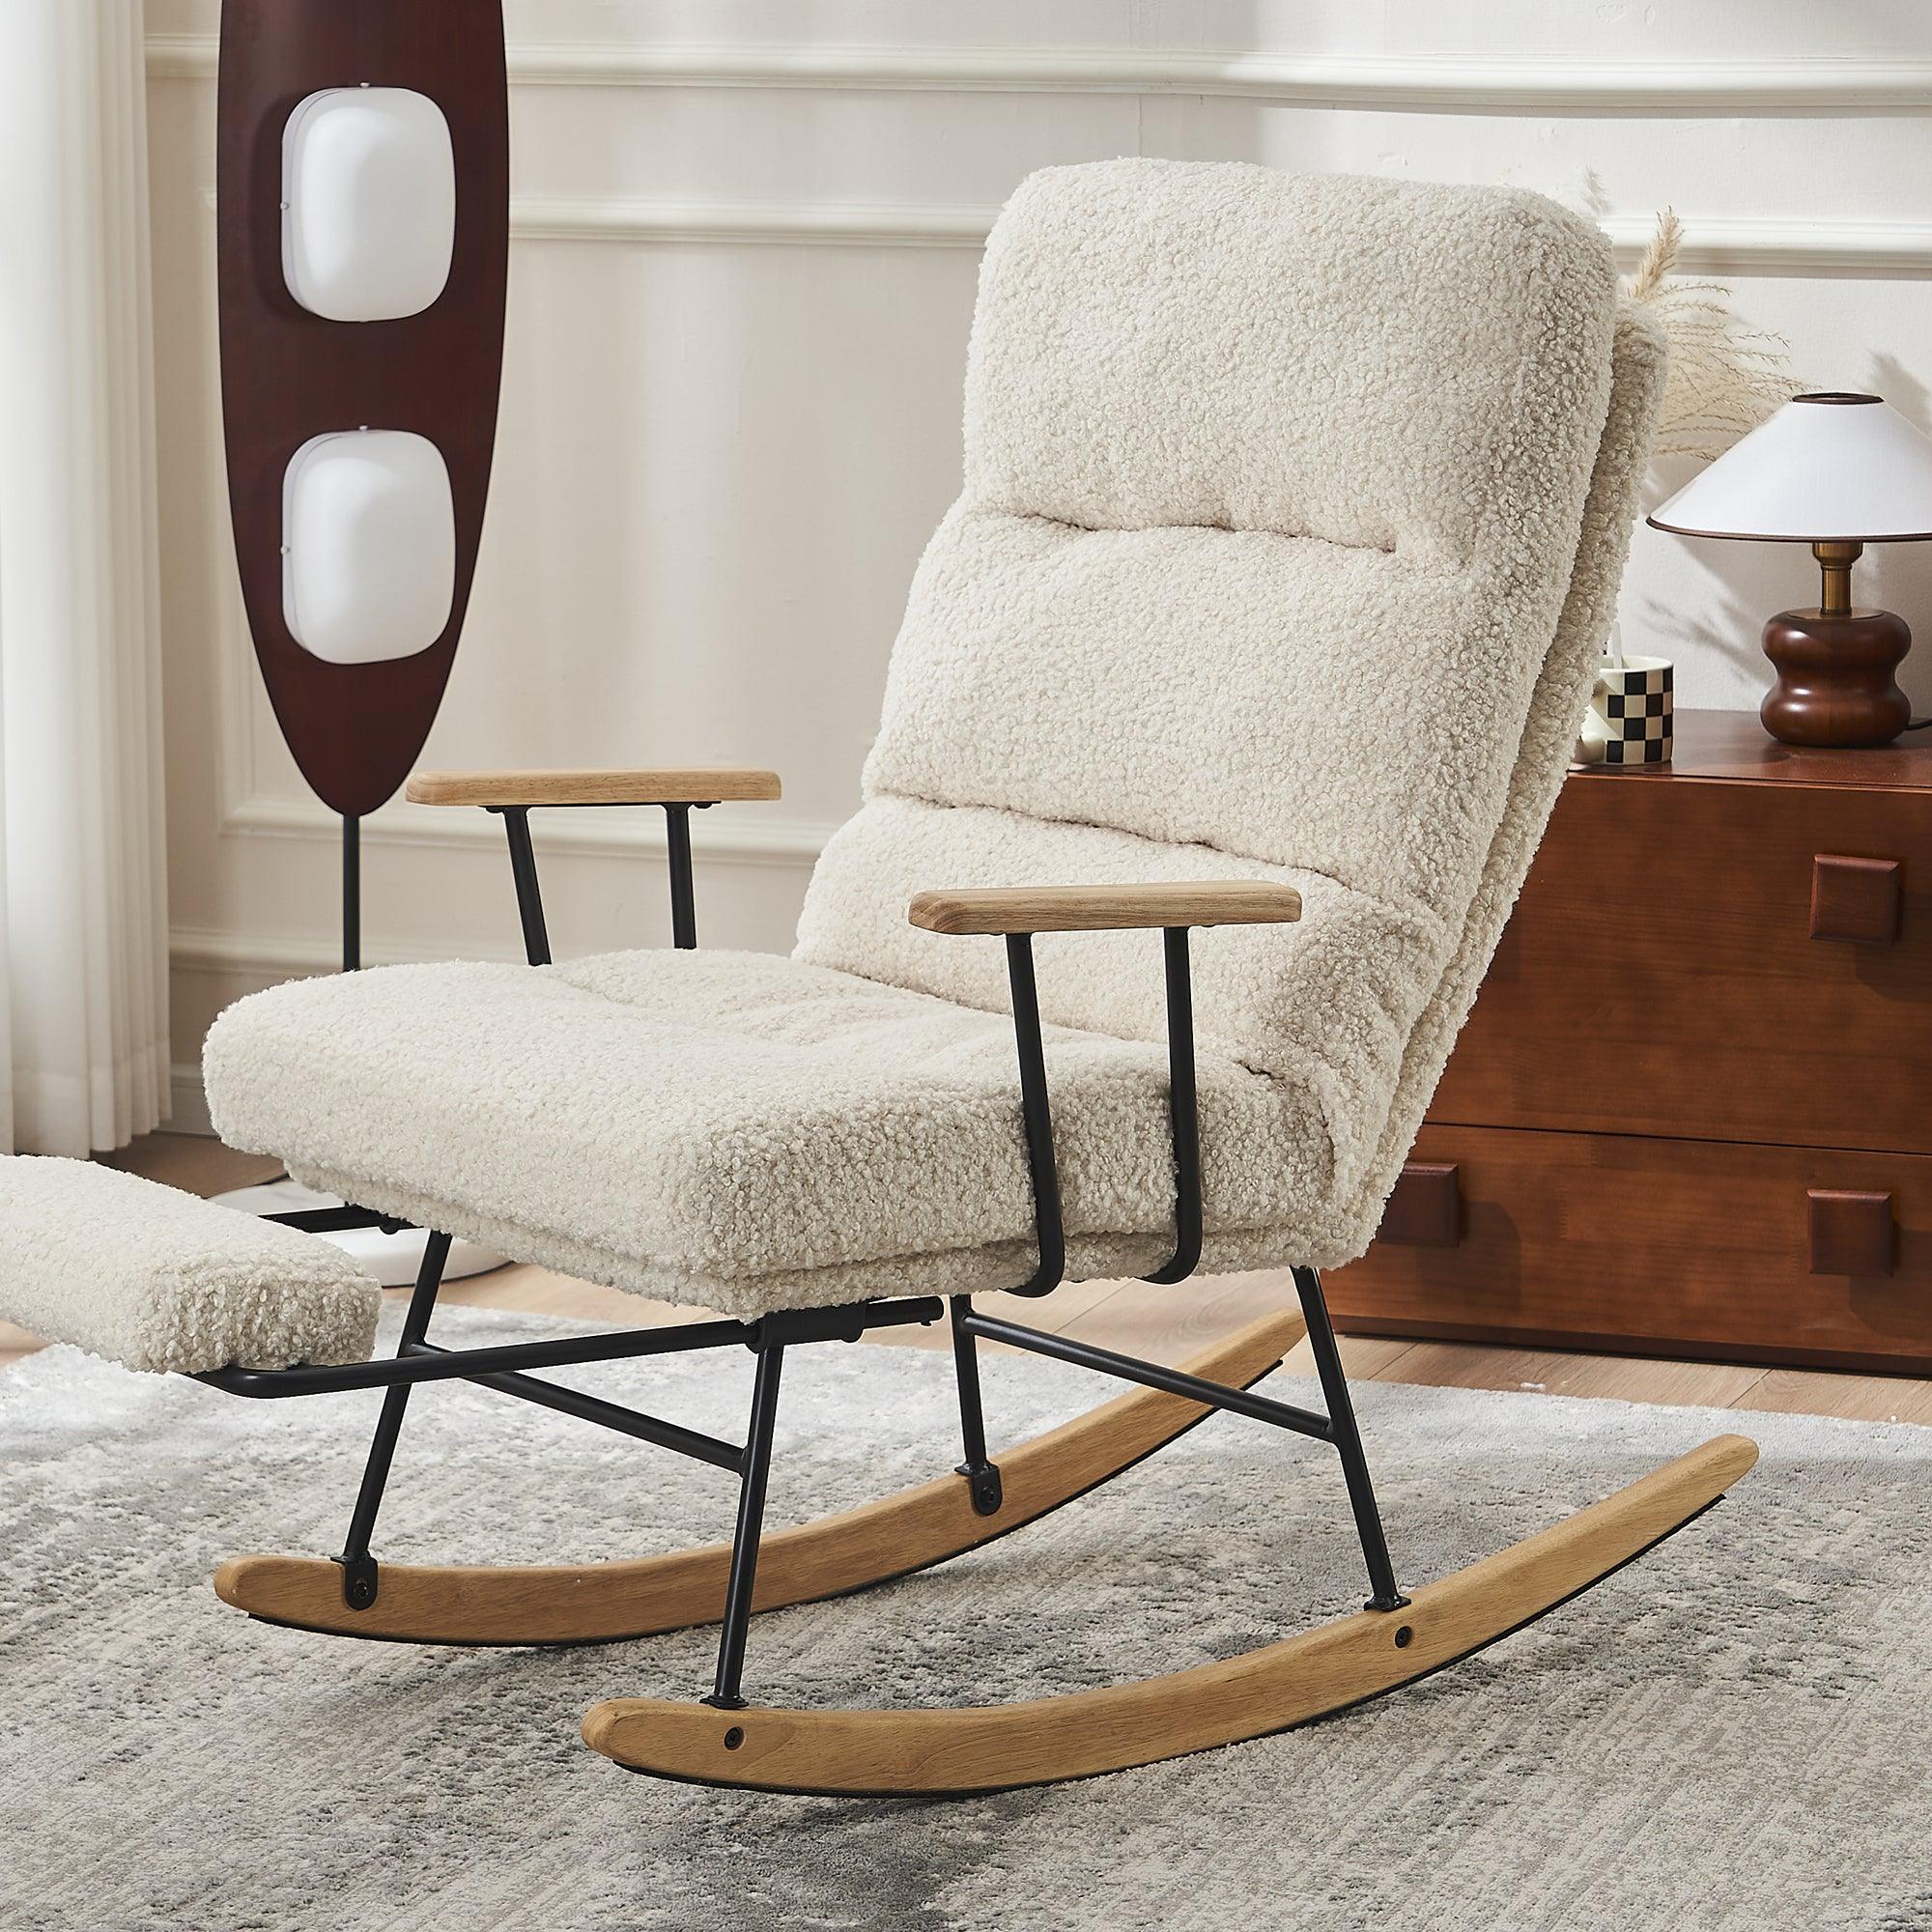 🆓🚛 Modern Teddy Gliding Rocking Chair With High Back, Retractable Footrest, & Adjustable Back Angle for Nursery, Living Room, & Bedroom, Beige